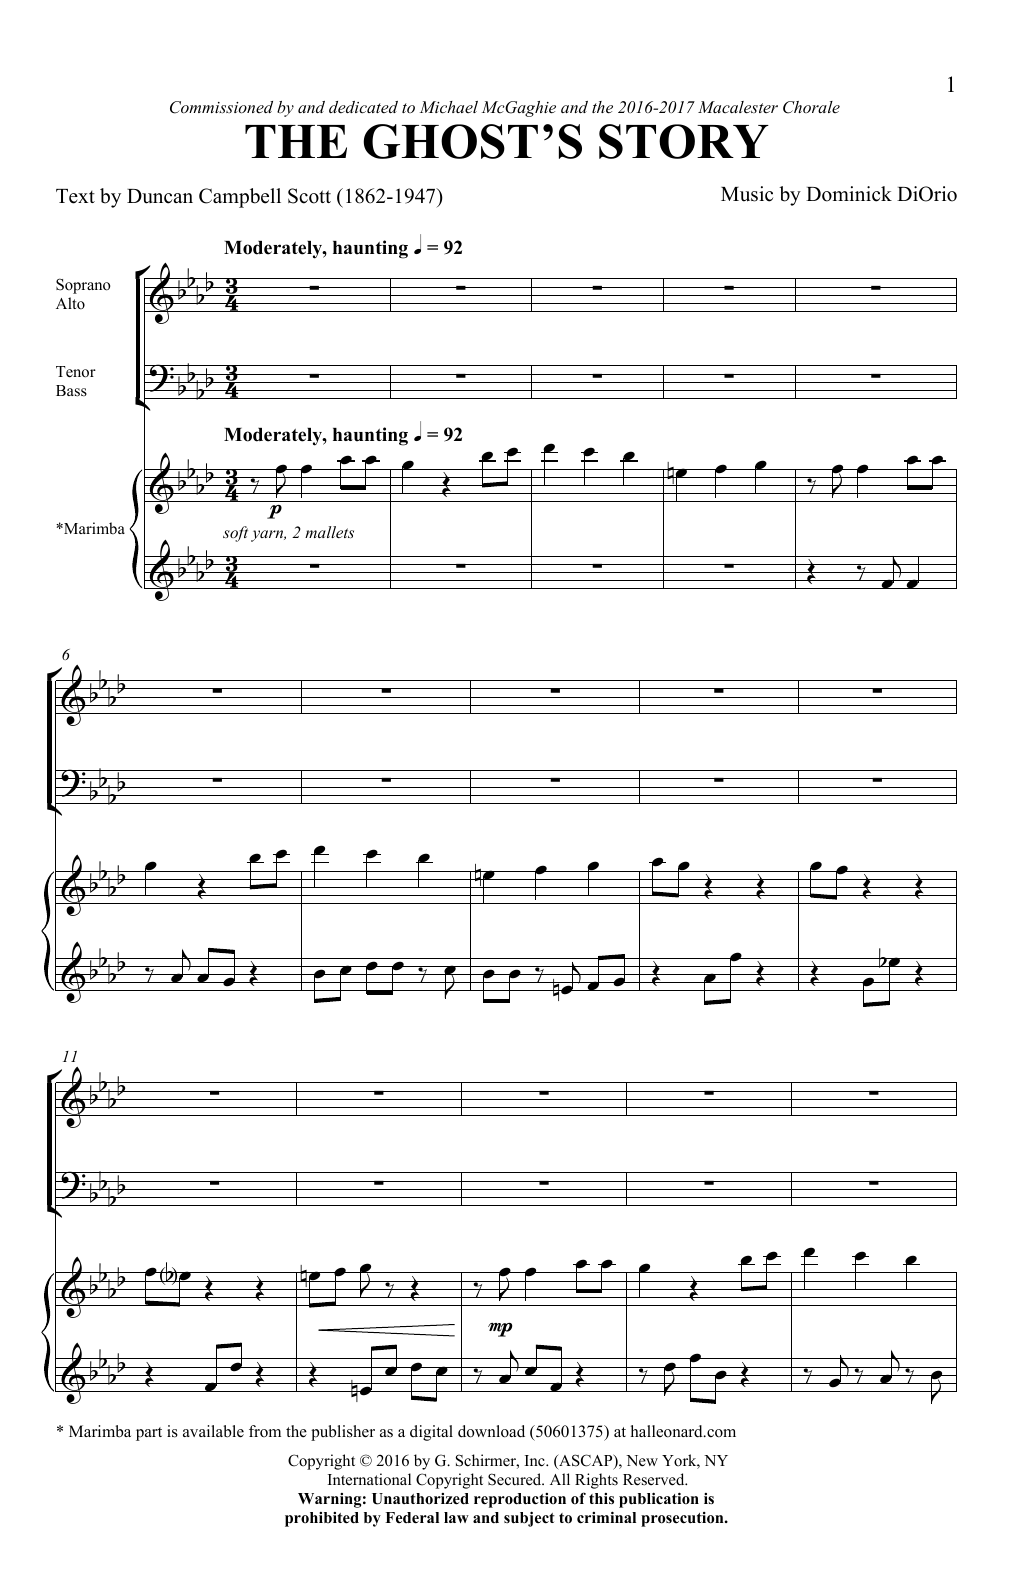 Download Duncan Campbell Scott & Dominick DiO The Ghost's Story Sheet Music